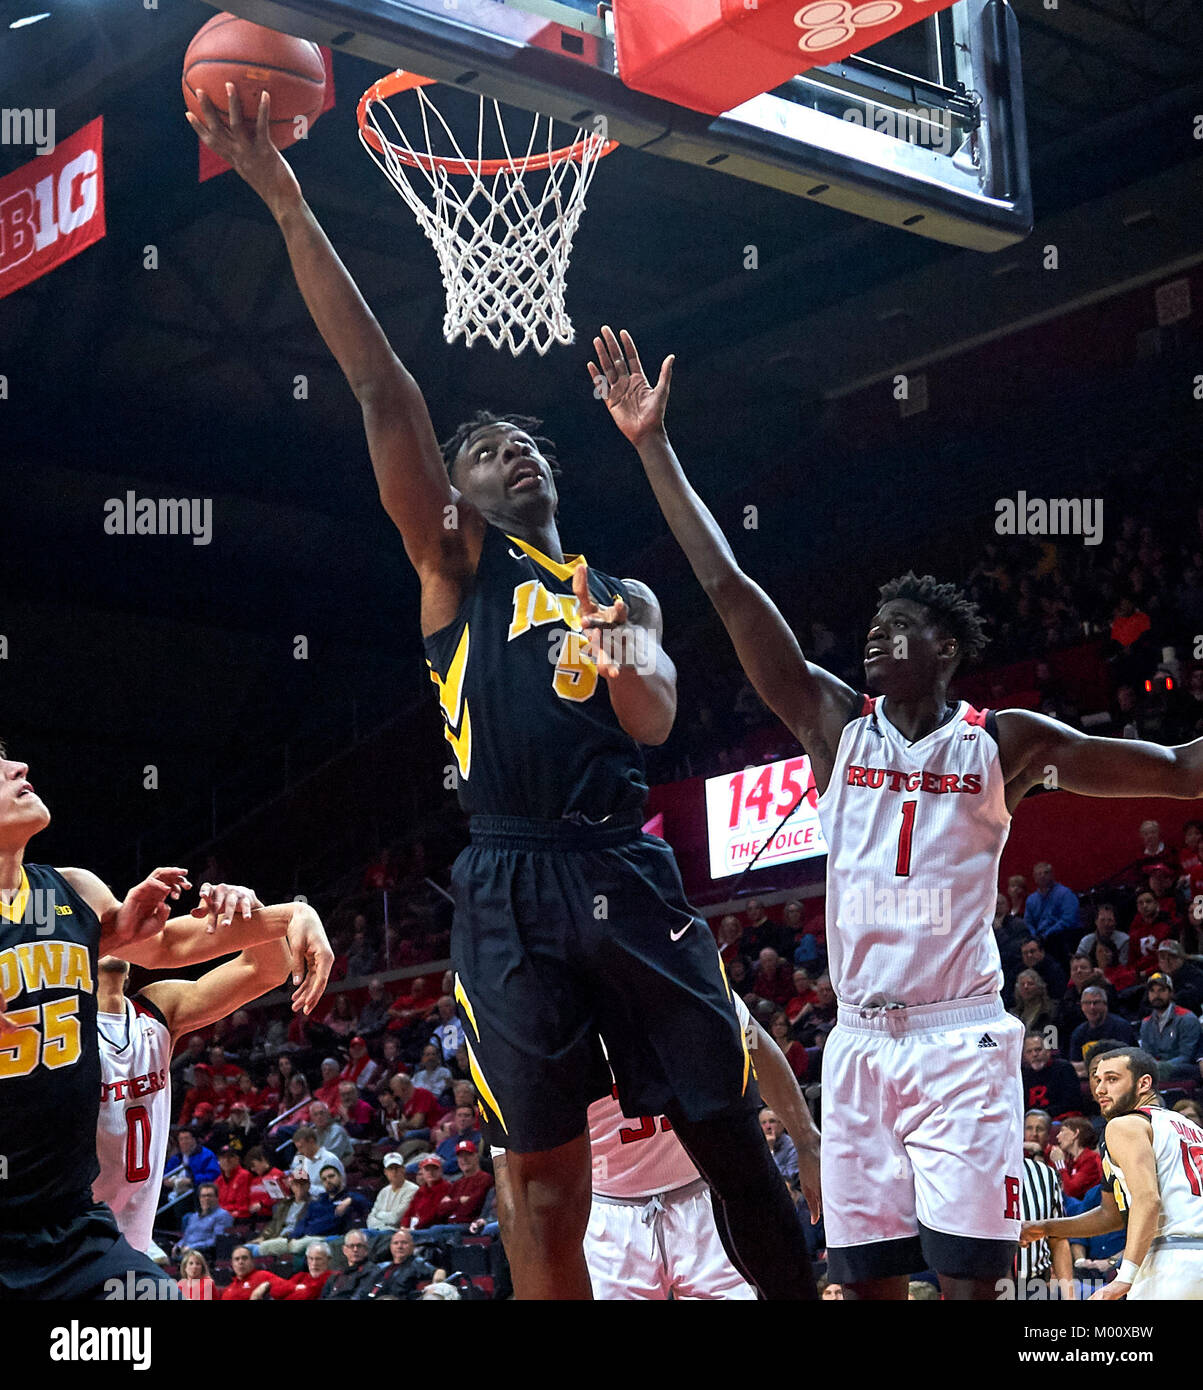 Piscataway, New Jersey, USA. 17th Jan, 2018. Iowa Hawkeyes forward Tyler Cook (5) scores underneath the basket as Rutgers Scarlet Knights forward Candido Sa (1) tries to defend during the first half between the Iowa Hawkeyes and the Rutgers Scarlet Knights at Rutgers Athletic Center in Piscataway, New Jersey. Duncan Williams/CSM/Alamy Live News Stock Photo